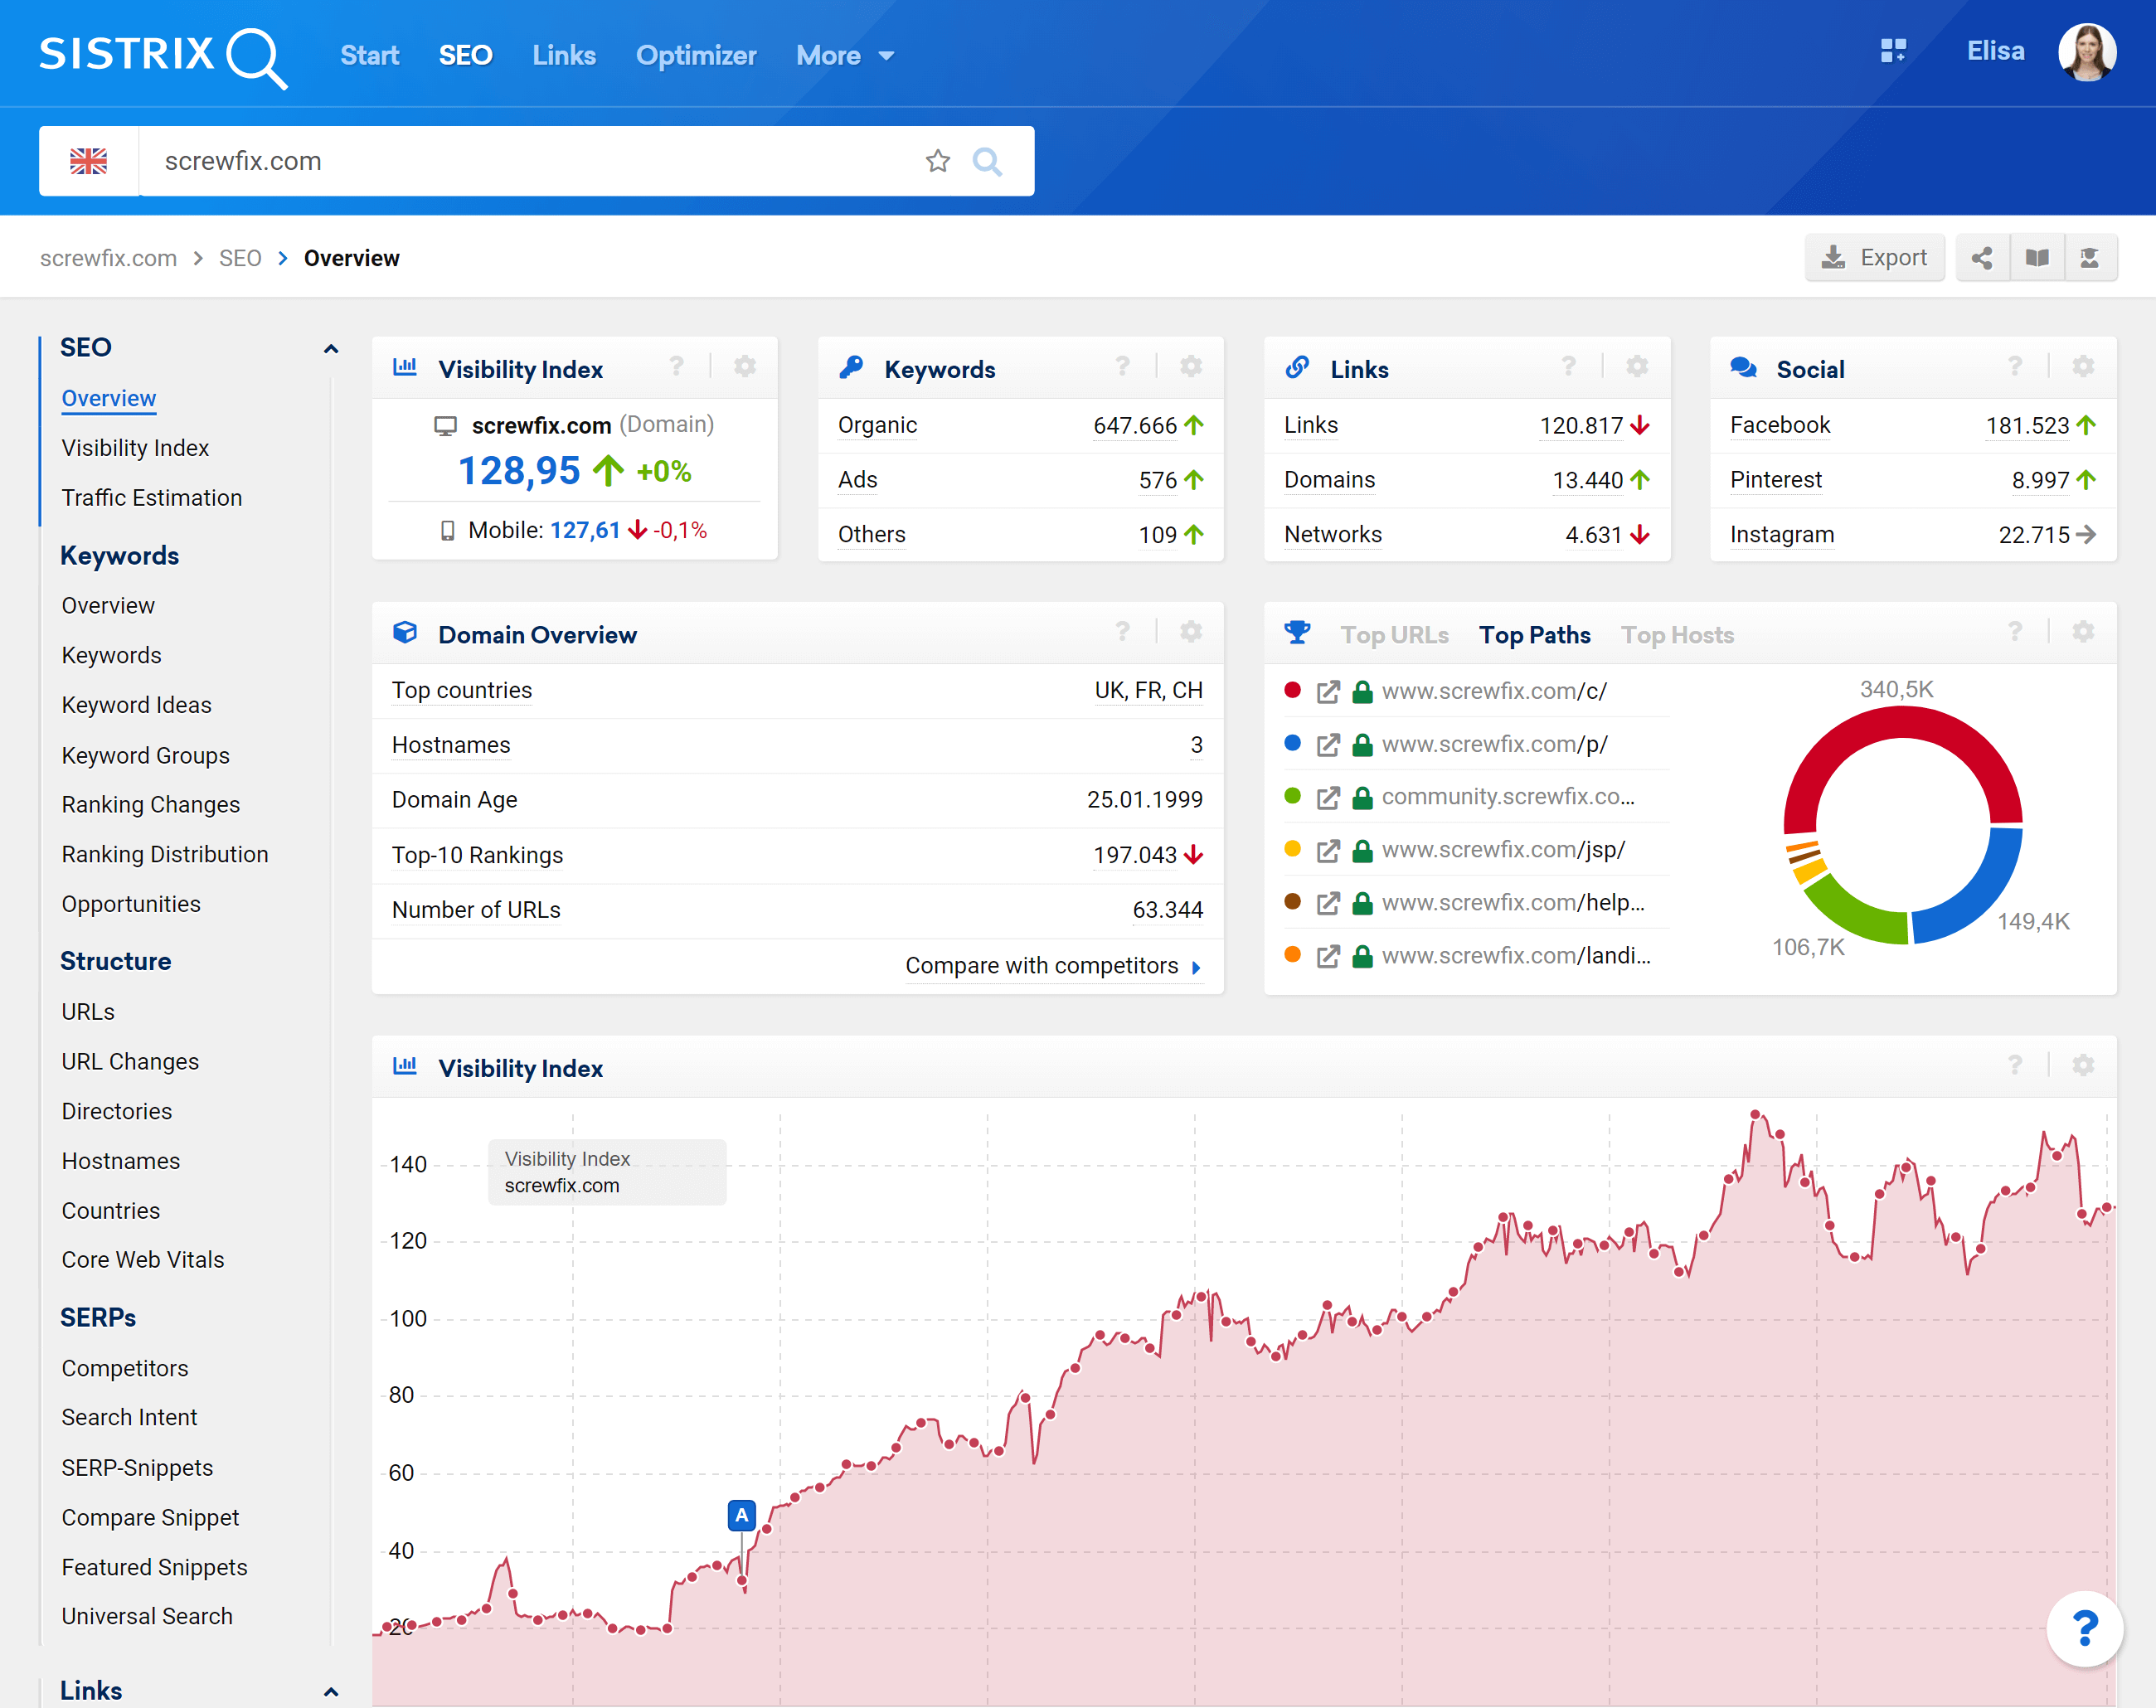 Domain overview page of screwfix.com in the SISTRIX Toolbox